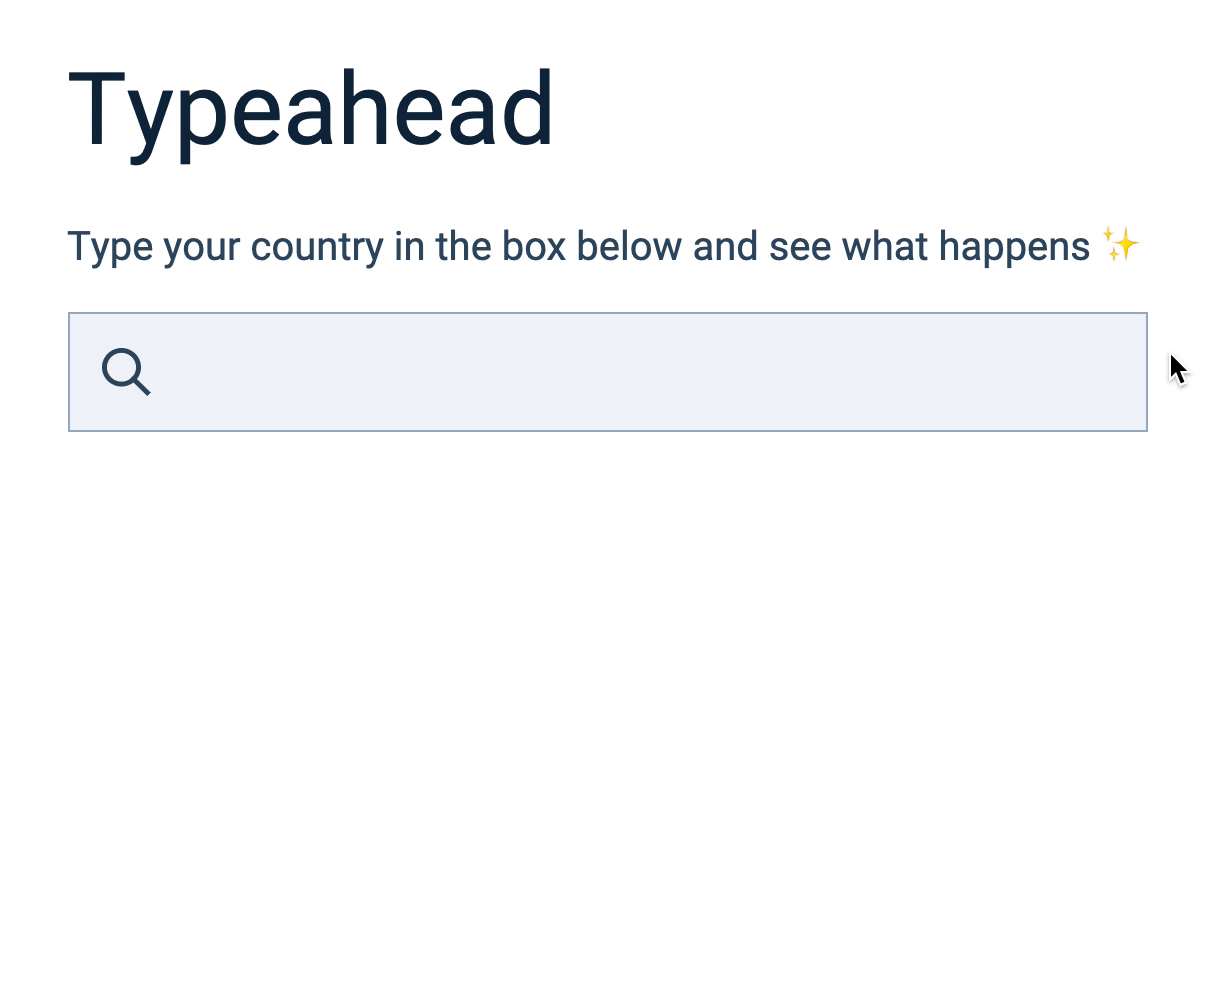 The Typeahead